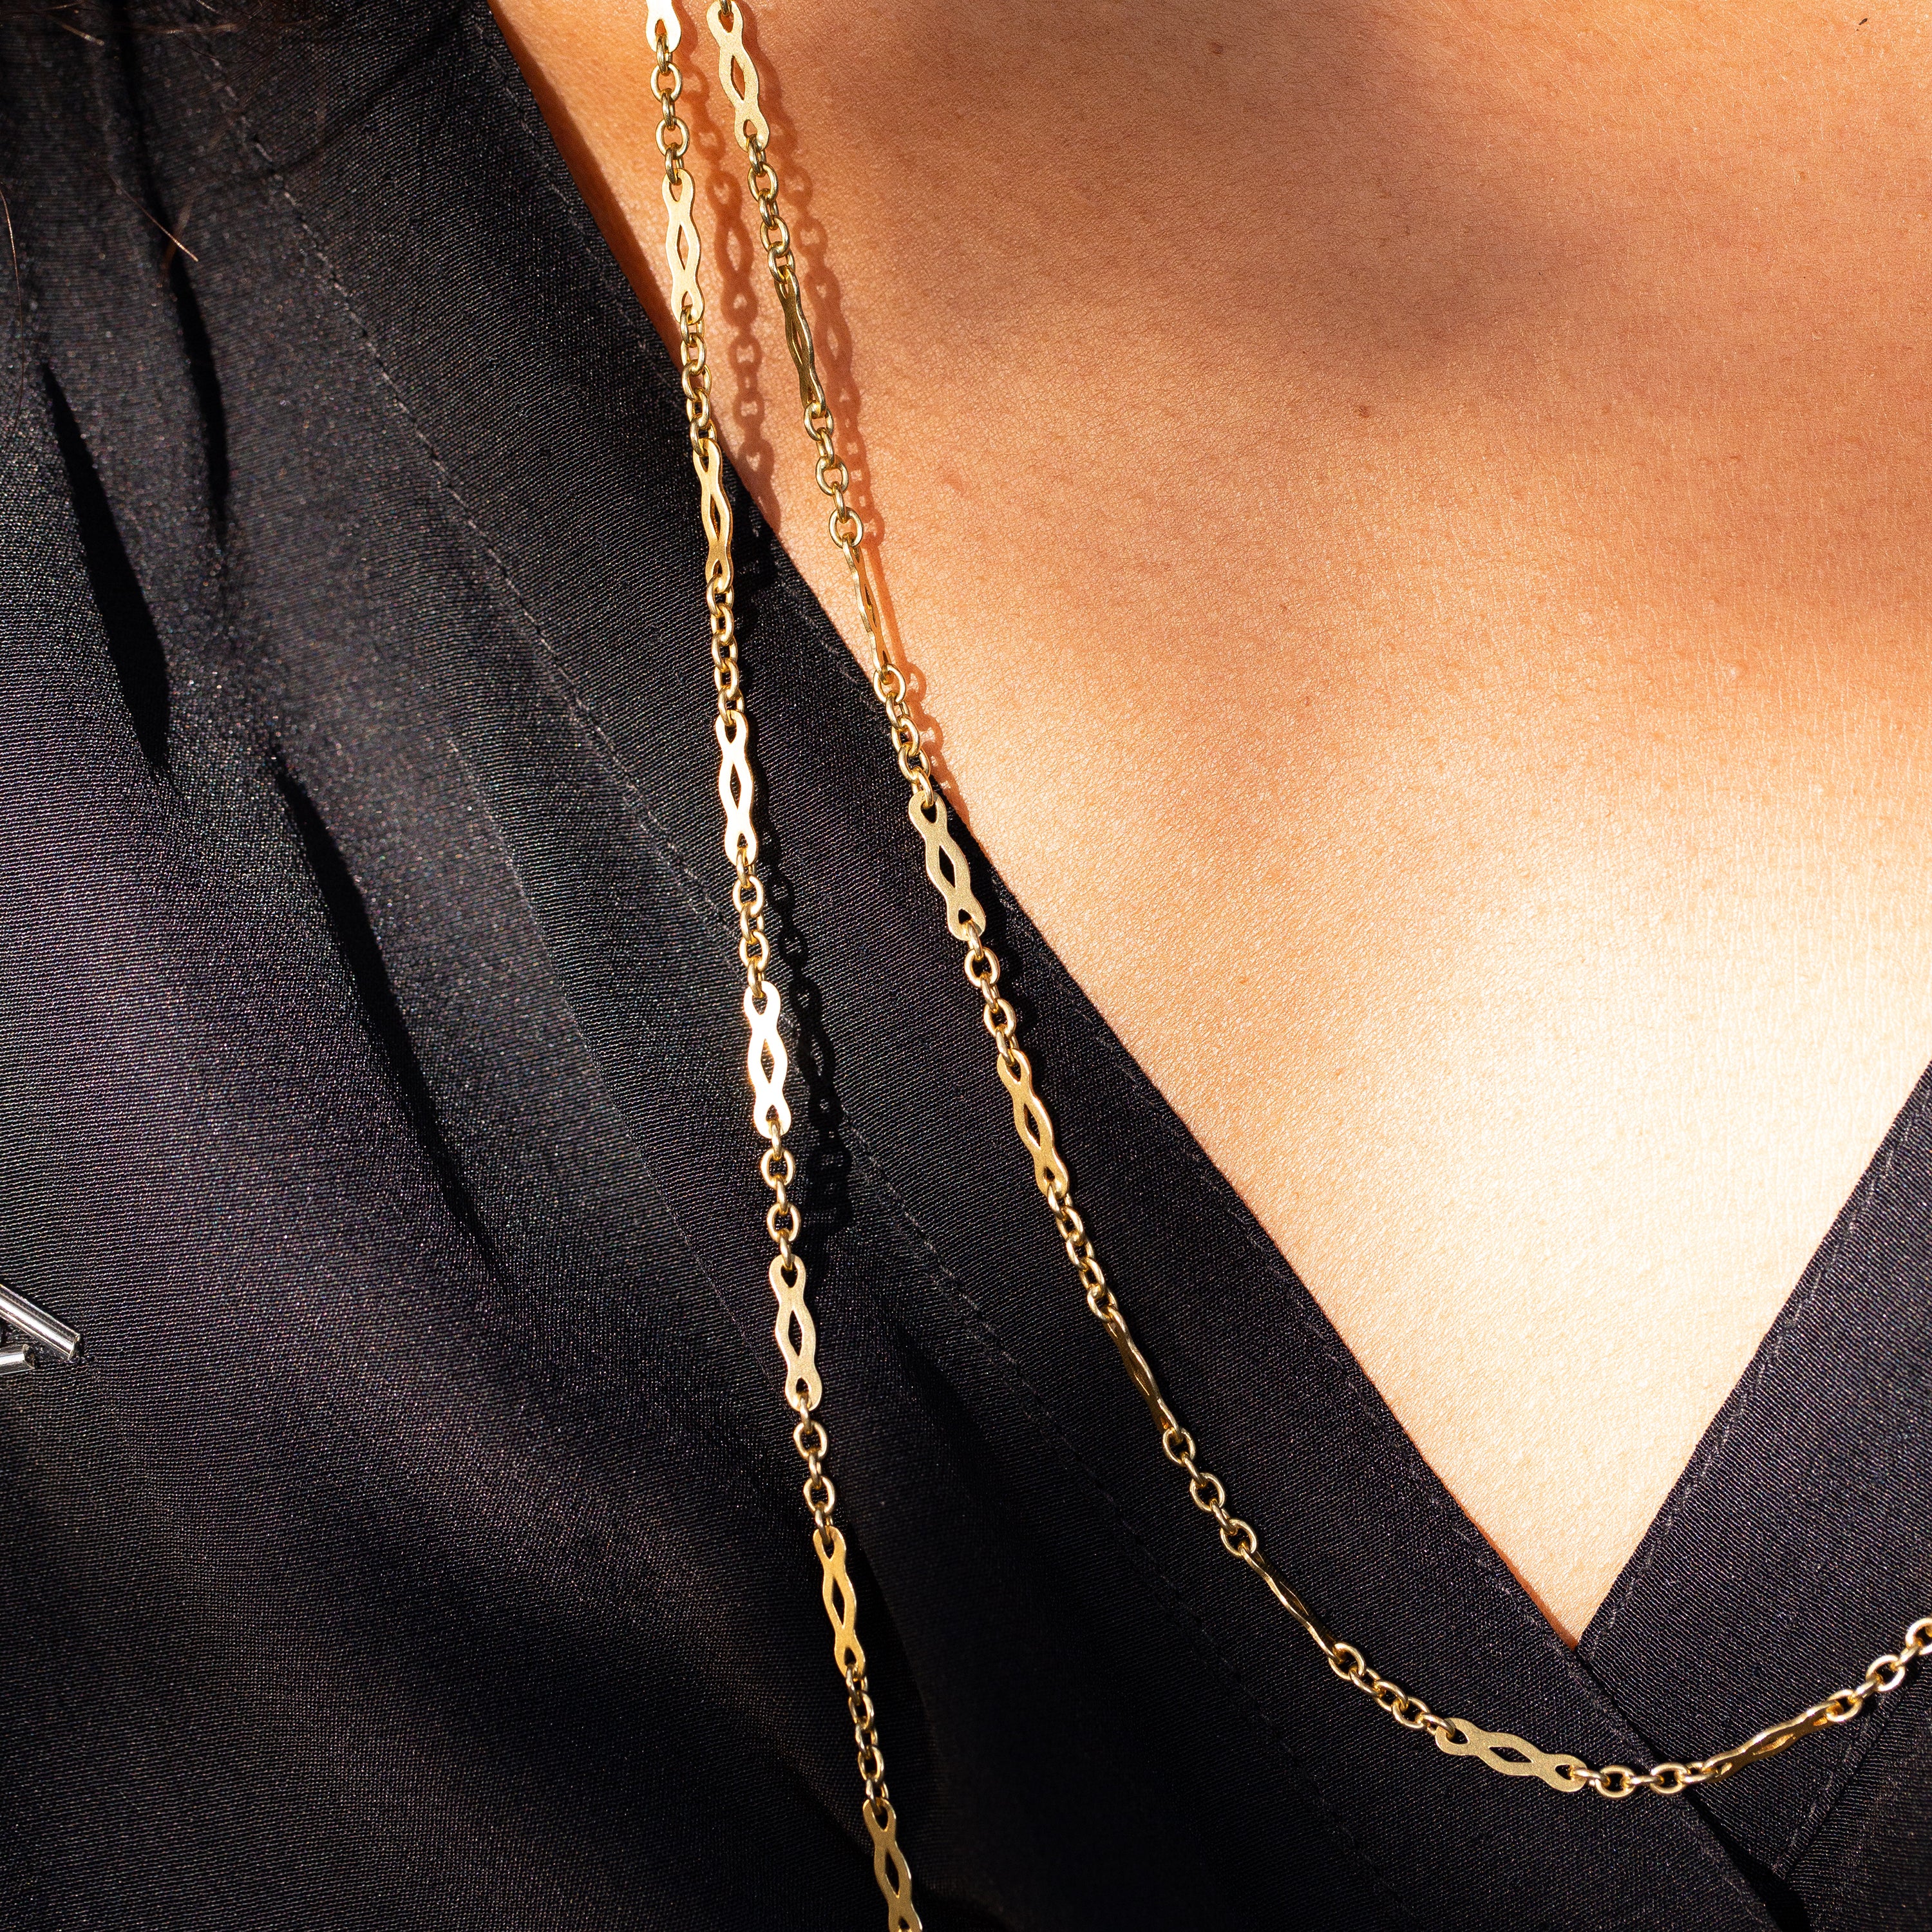 Long 18k Gold 59" Chain Necklace